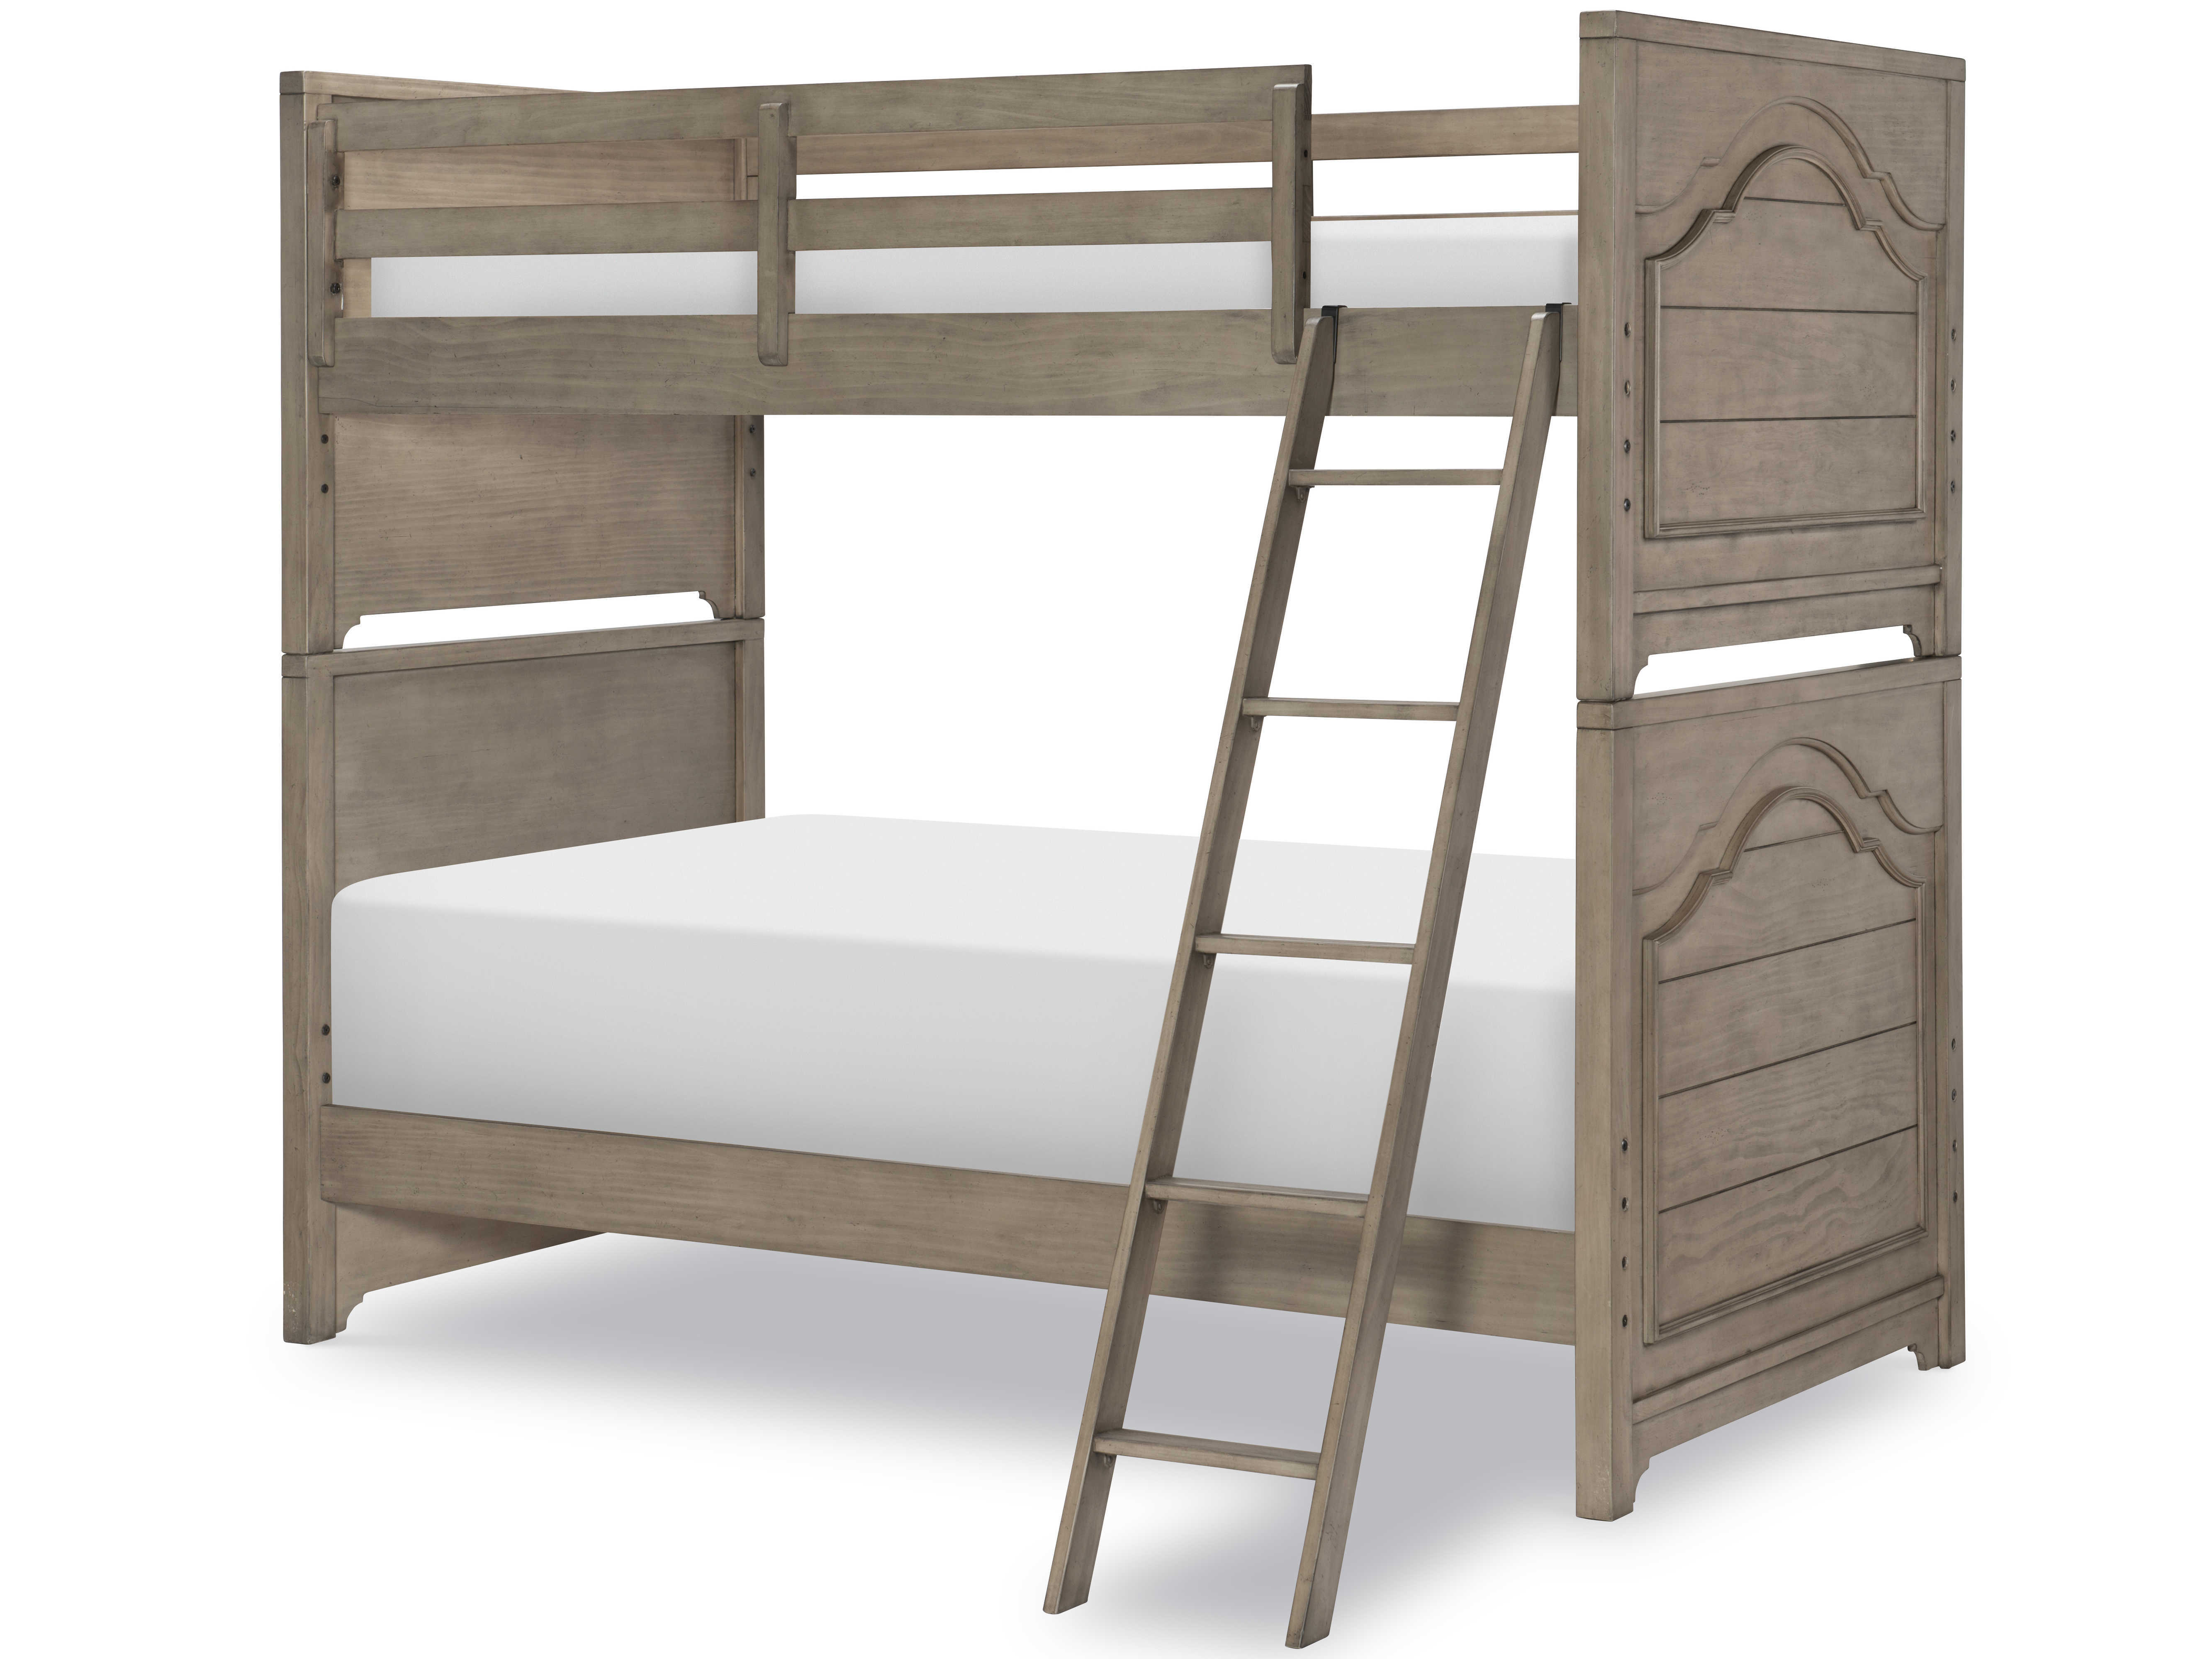 Old Crate Brown Twin Over Bunk Bed, Old Wood Bunk Beds